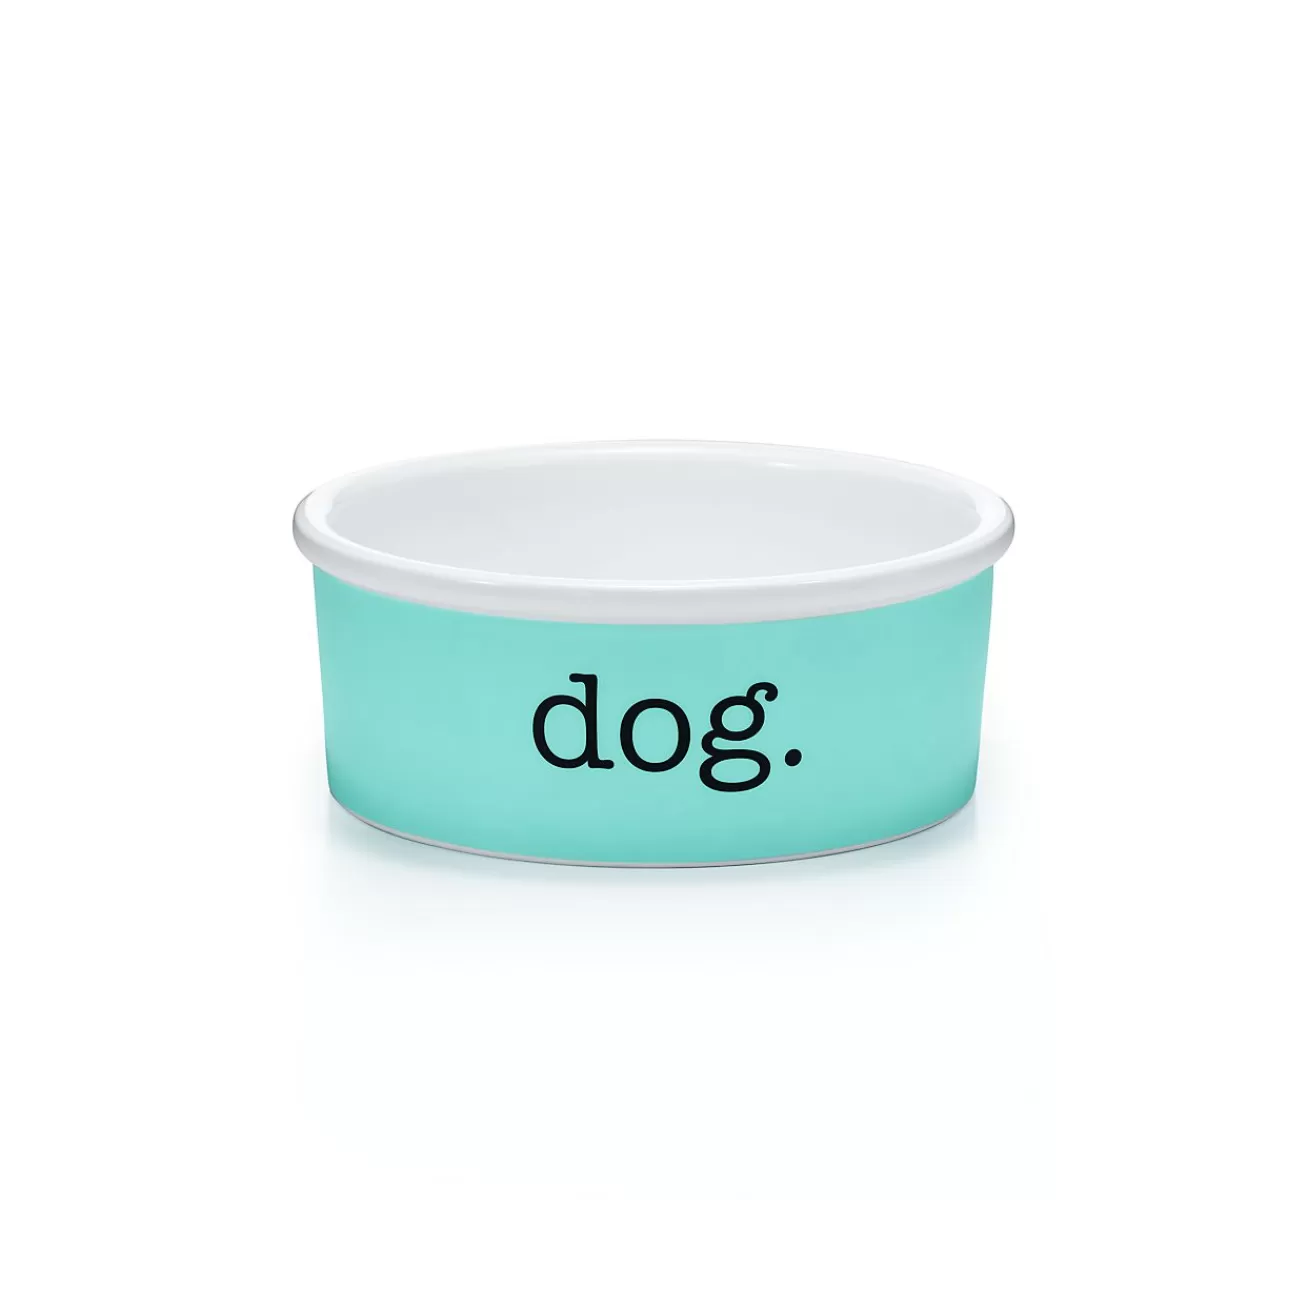 Tiffany & Co. Dog bowl in bone china, small. | ^ Tiffany Blue® Gifts | Stationery, Games & Unique Objects